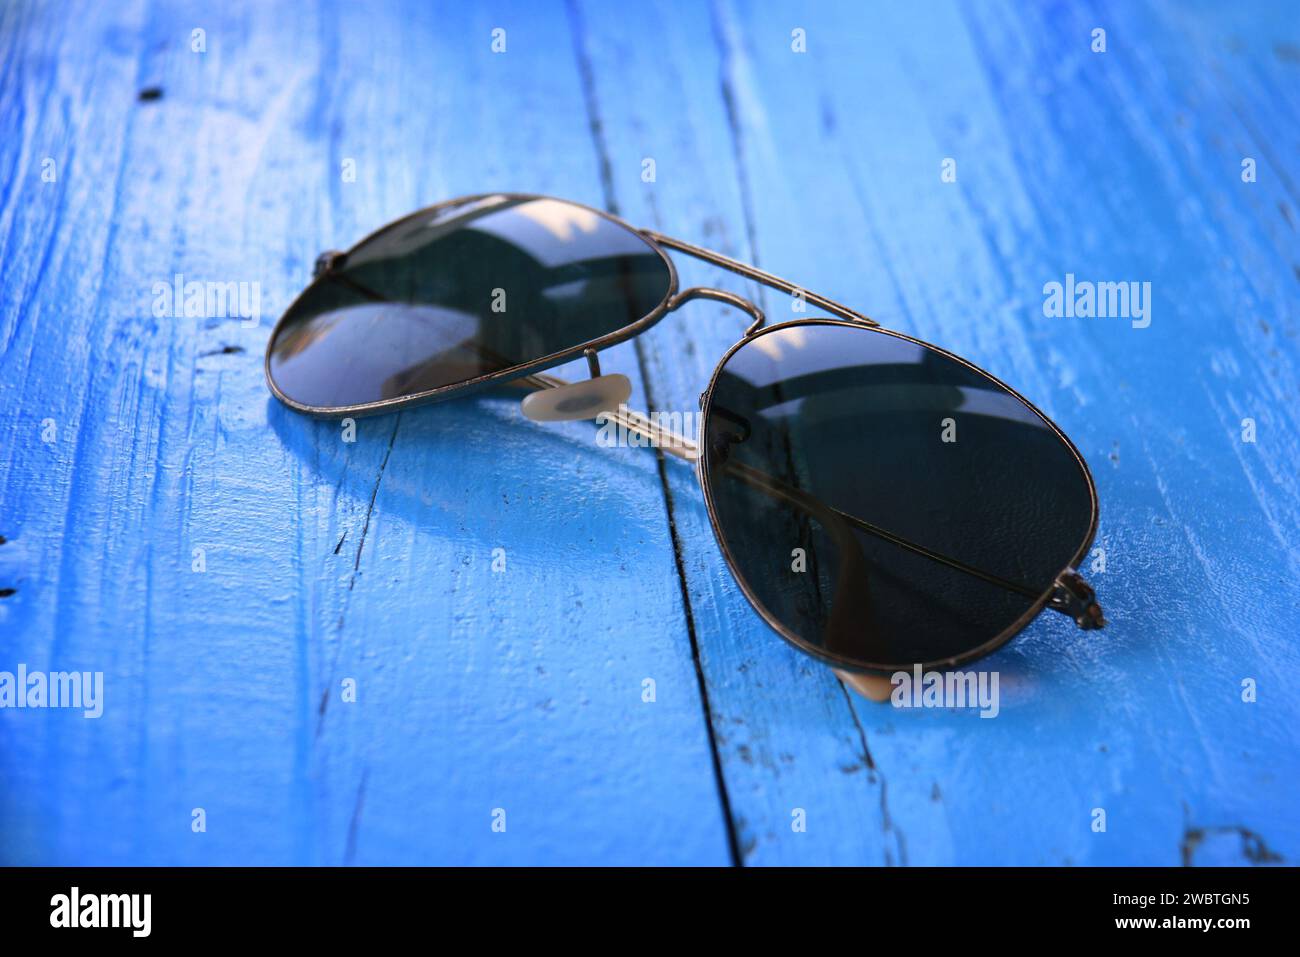 A pair of sunglasses on a blue wooden table. Stock Photo